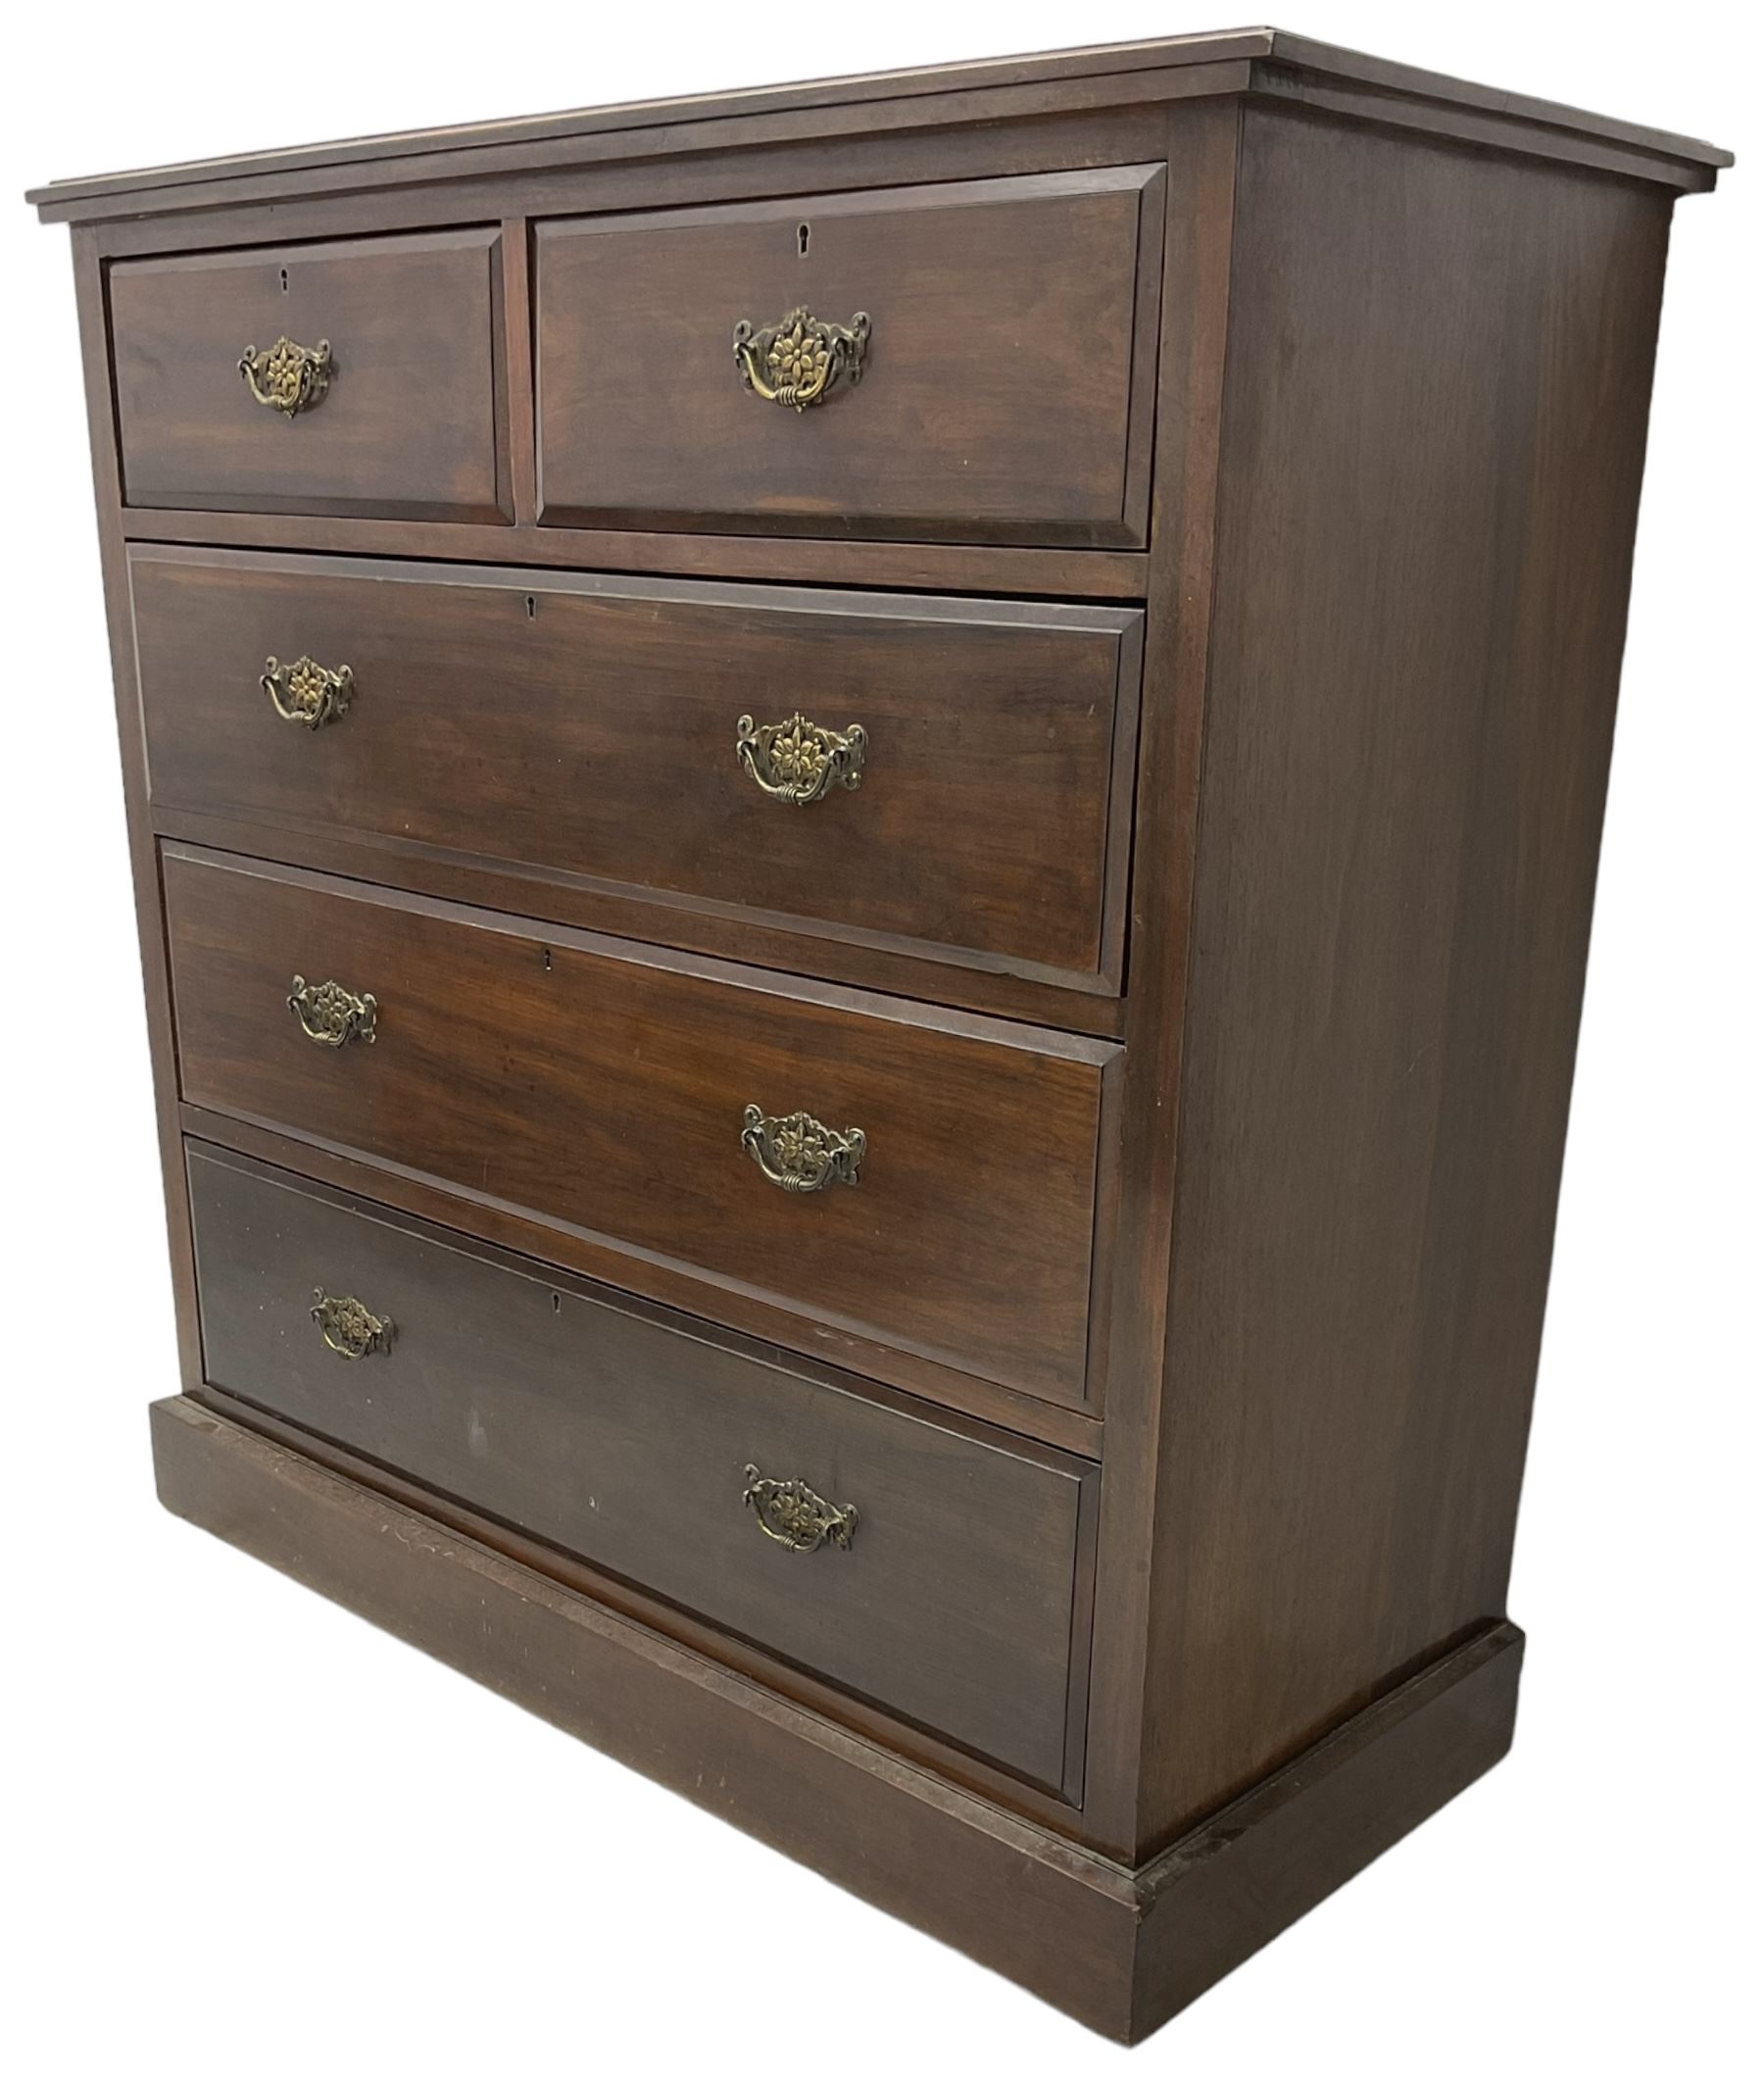 Late Victorian walnut chest - Image 5 of 6